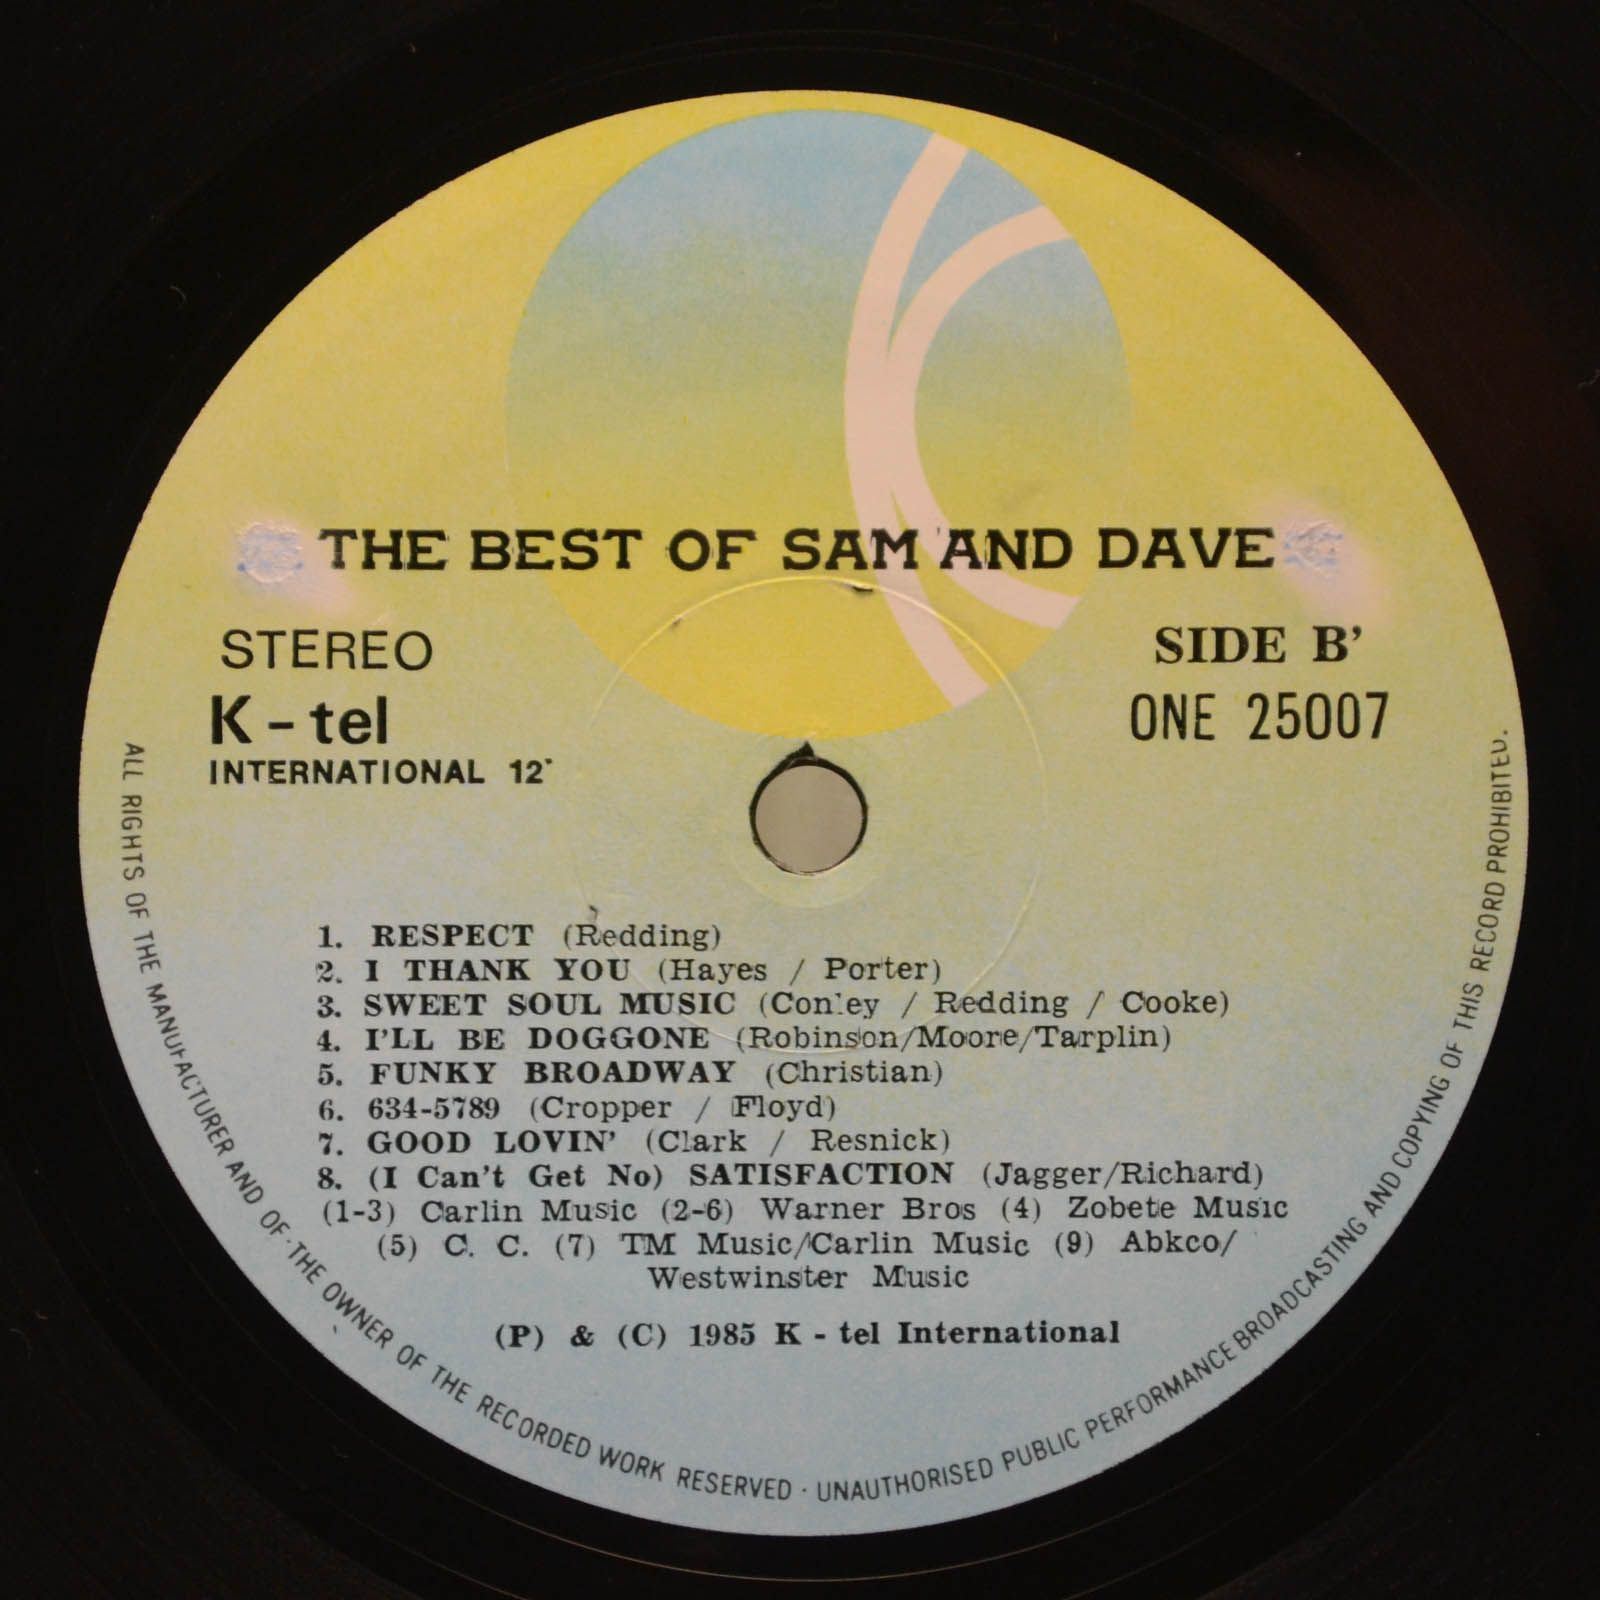 Sam & Dave — The Best Of, 1985